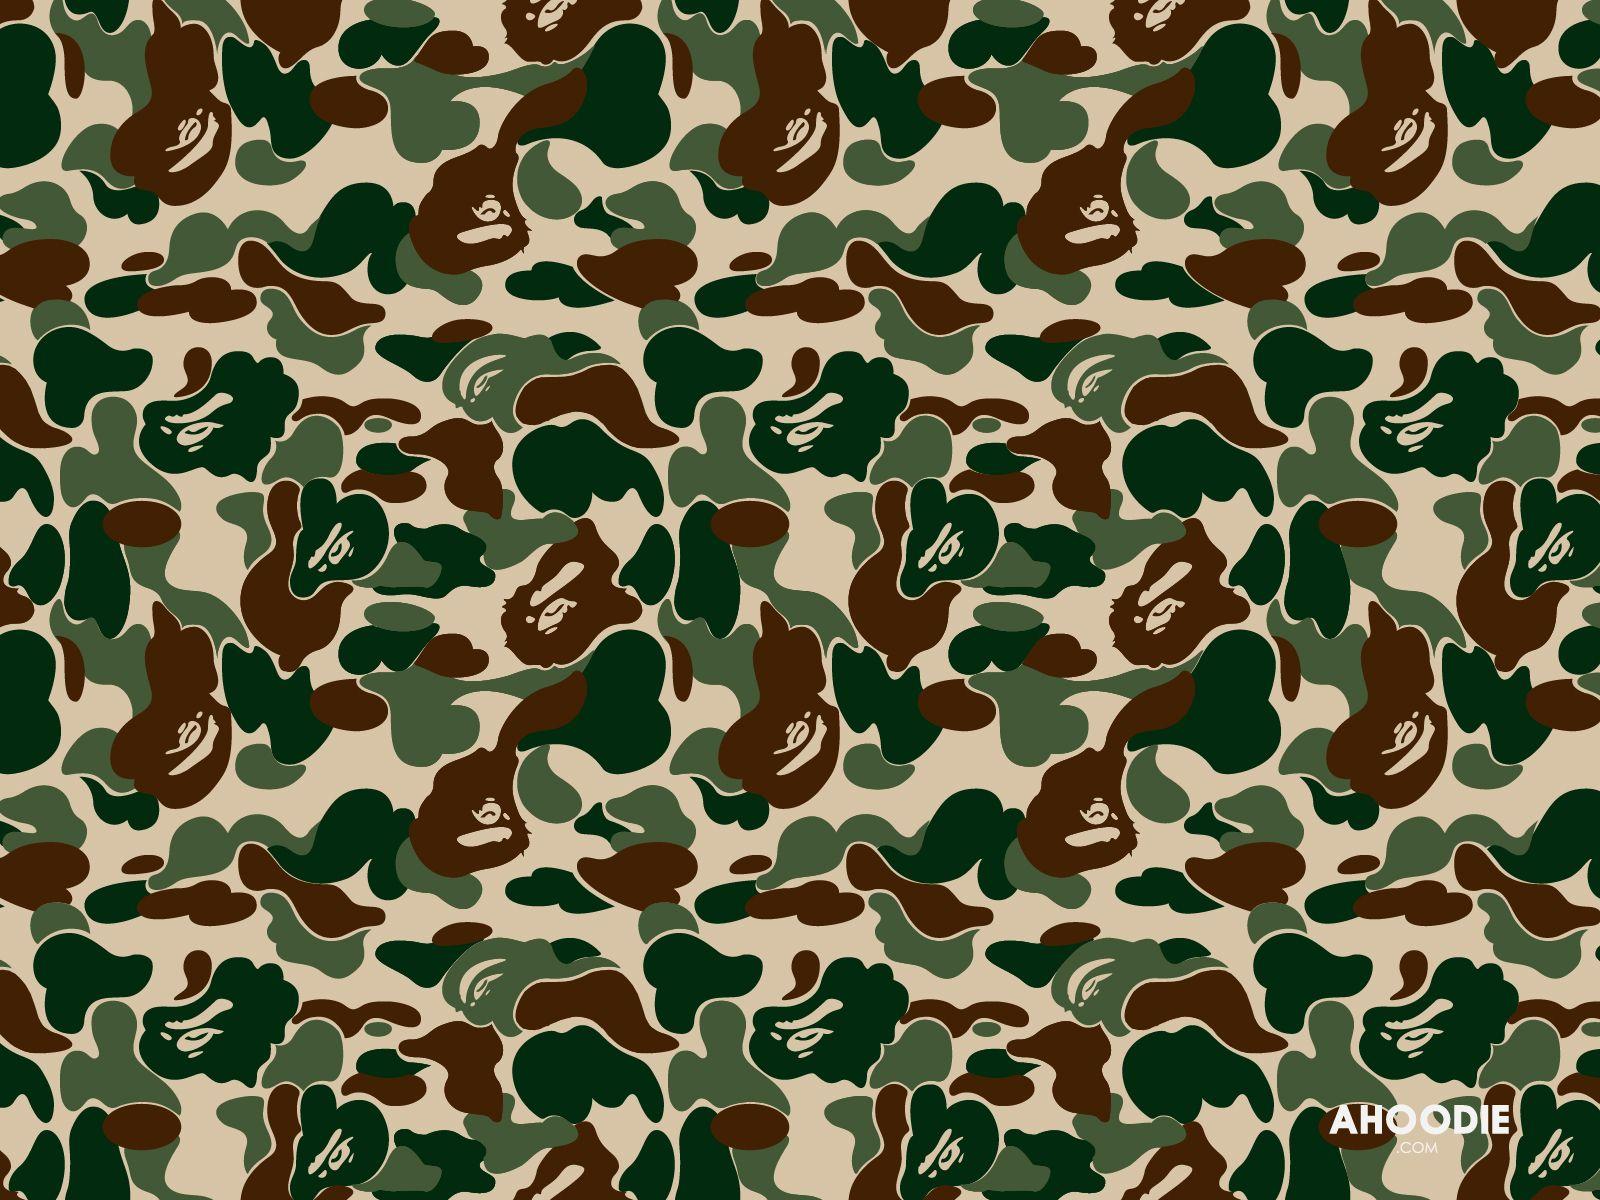 Green and Black BAPE Logo - Bape Clothing - Styles and Characters